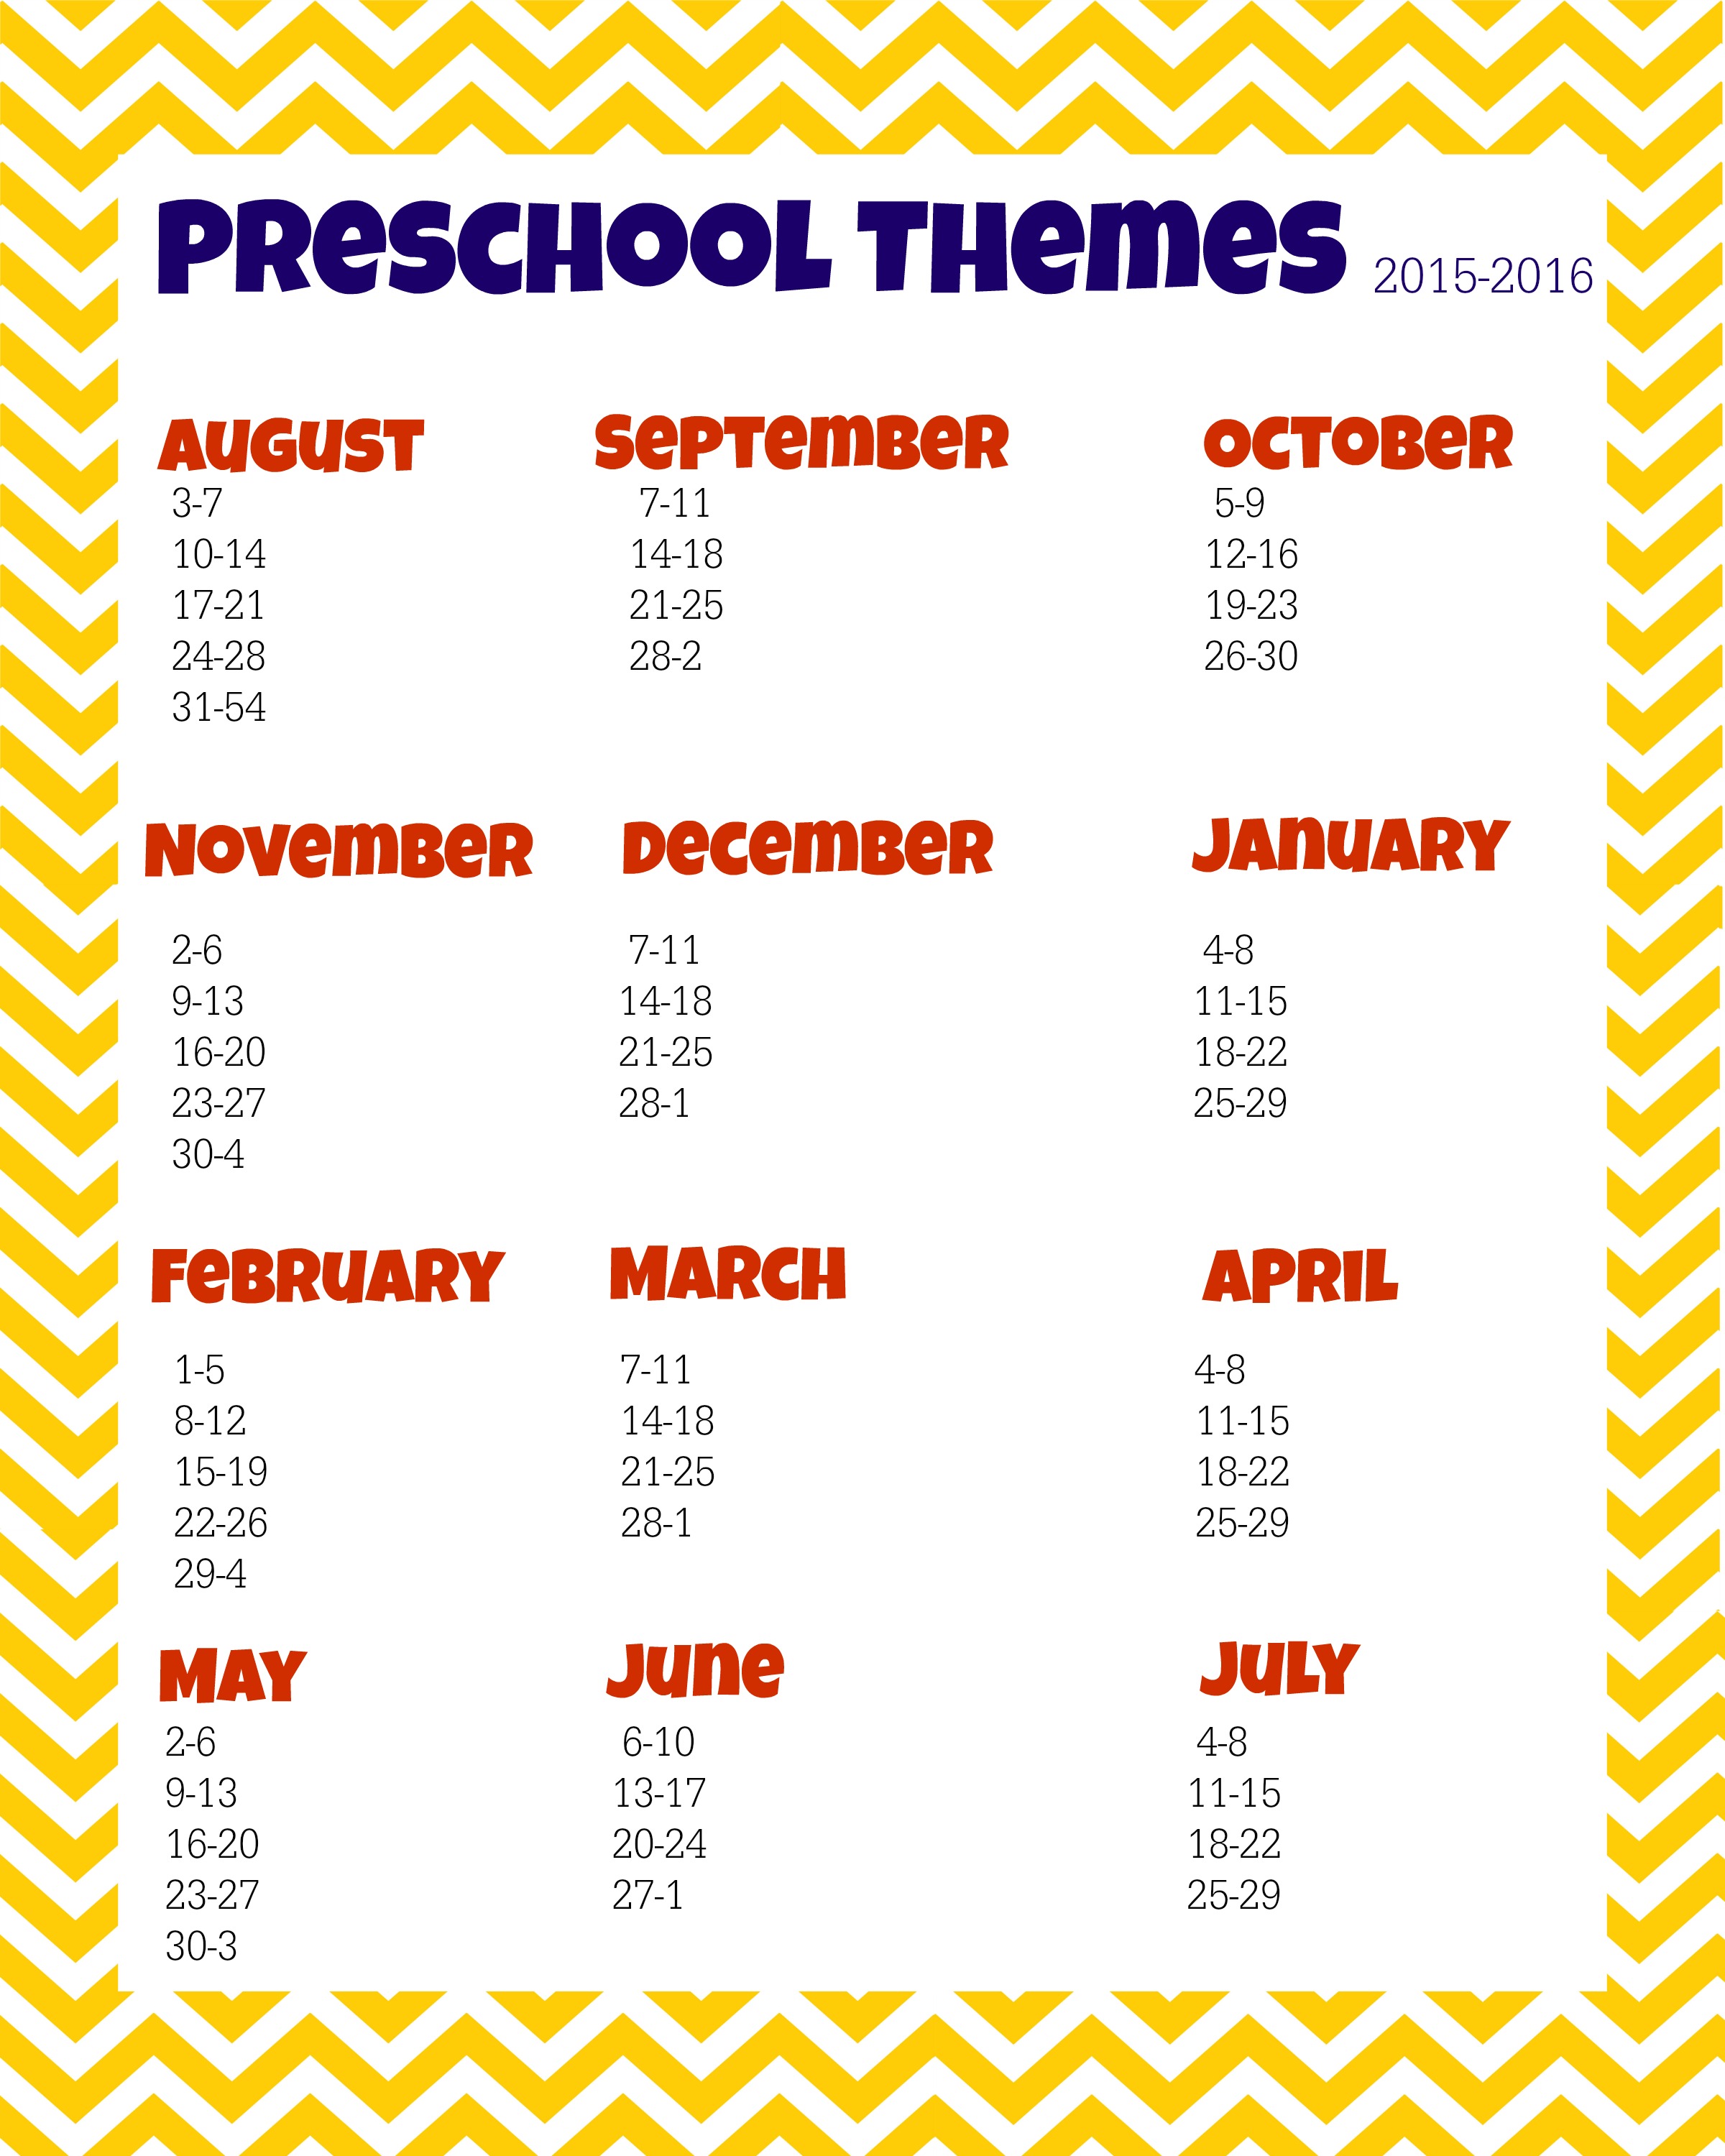 Preschool Themes Planning Sheet | More Excellent Me